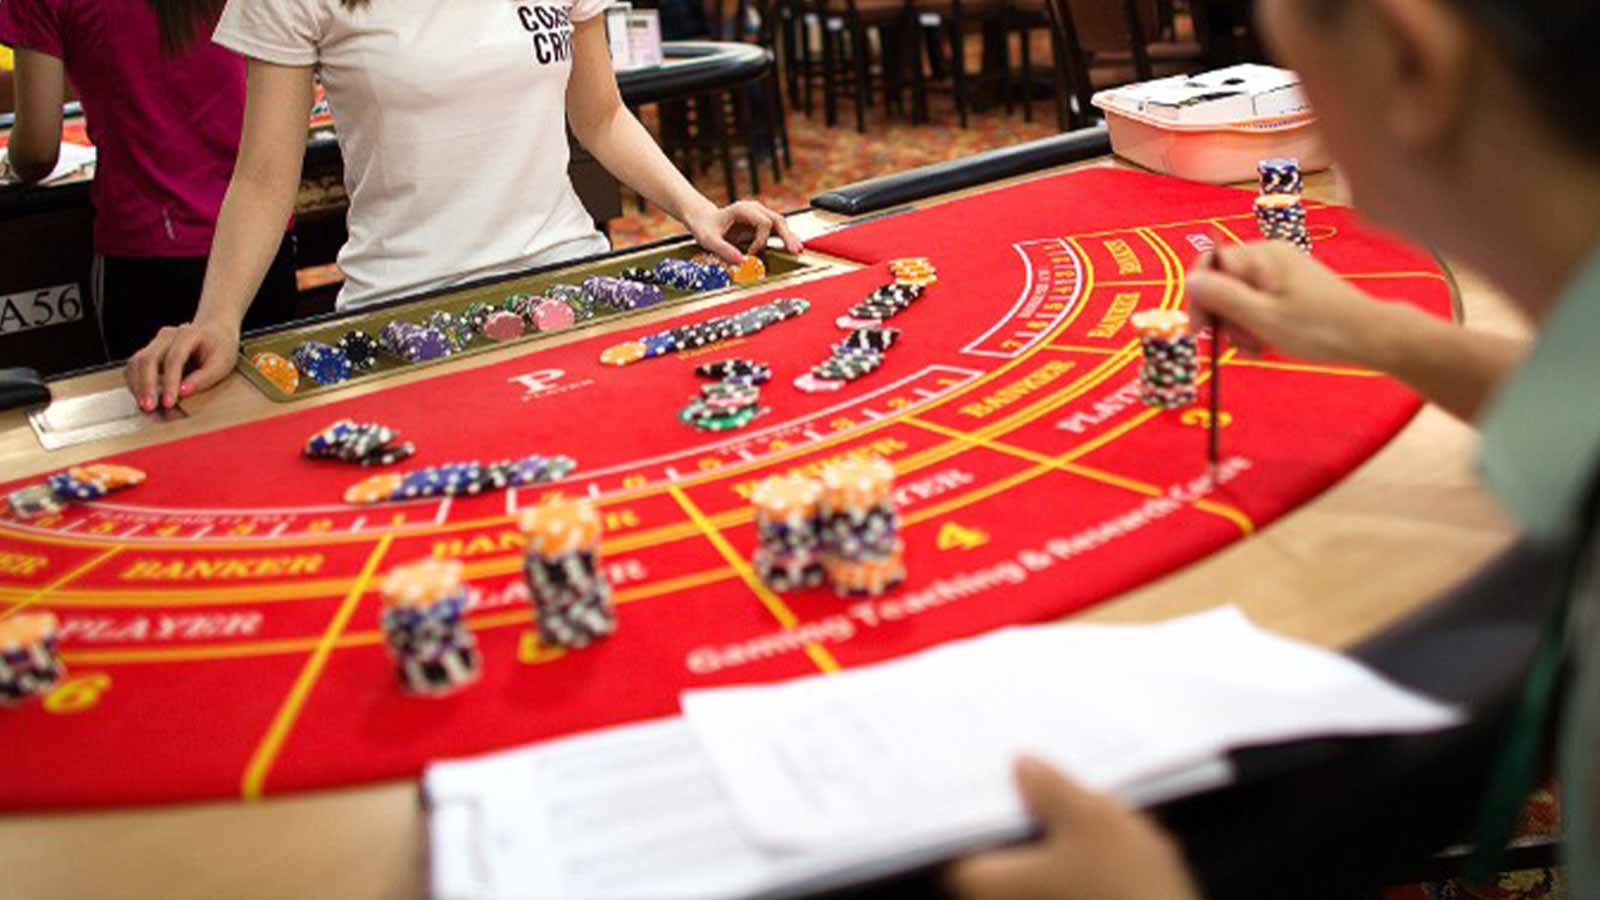 The Chinese government’s attitude towards the Macau casino industry